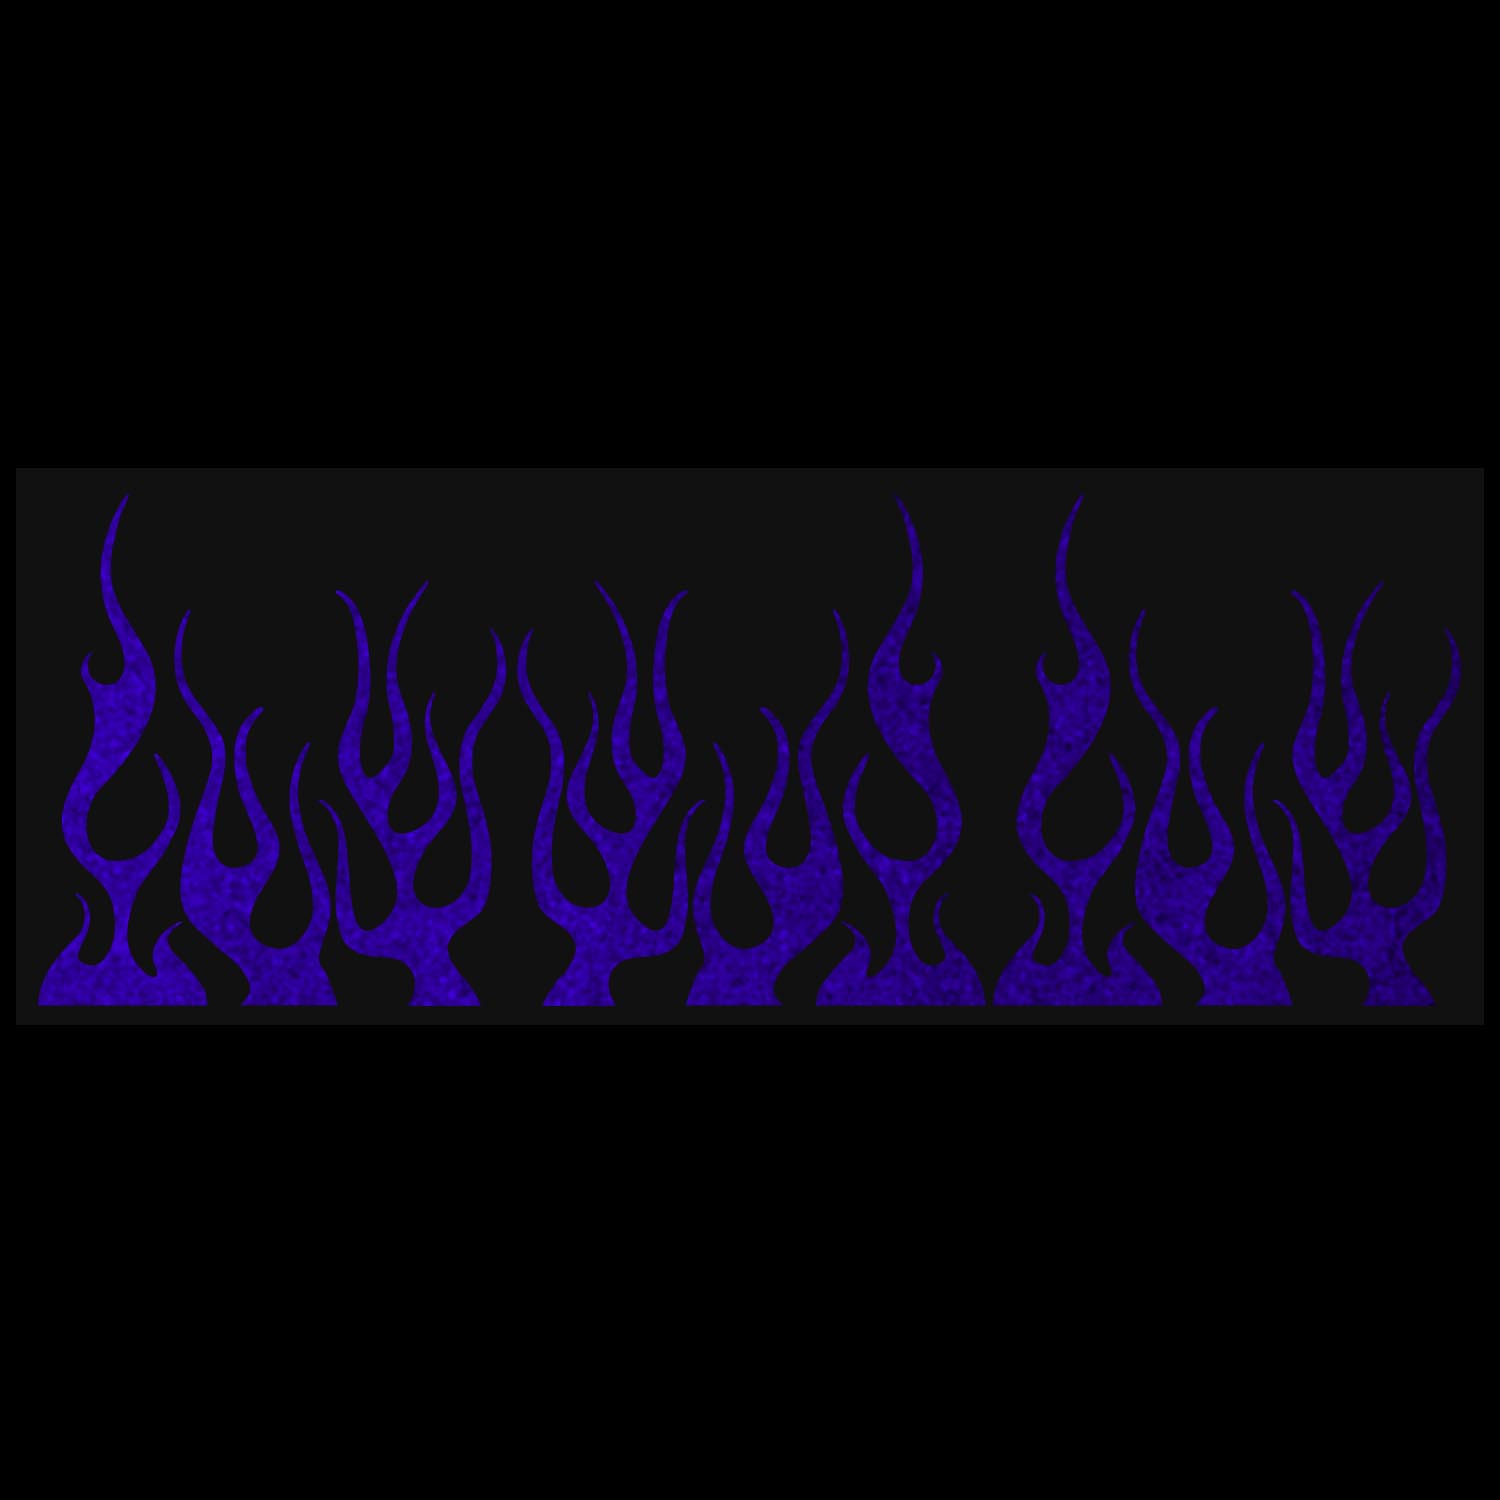 Aesthetic Flames Wallpapers